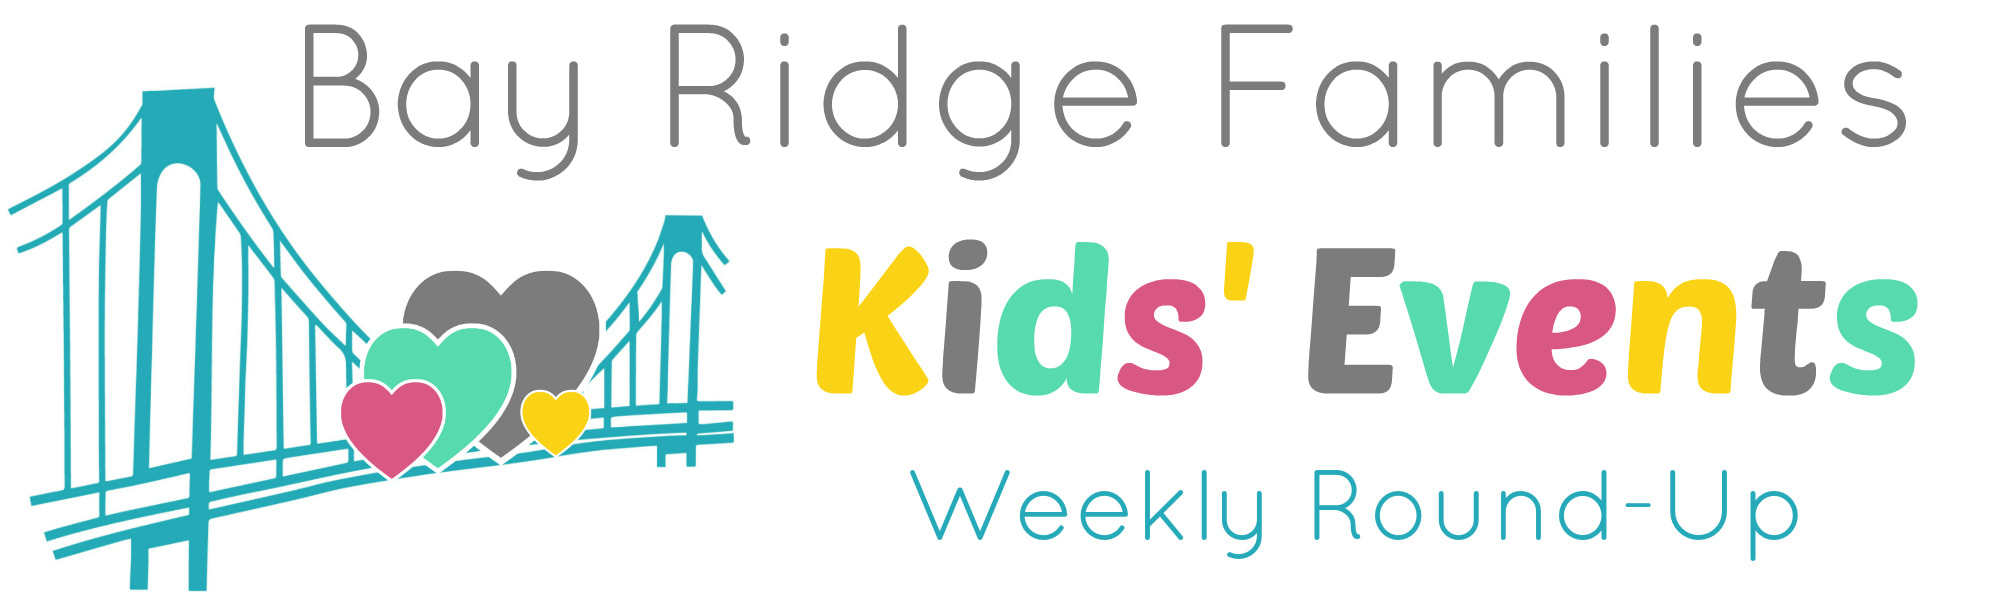 Greater Bay Ridge weekly family-friendly events roundup